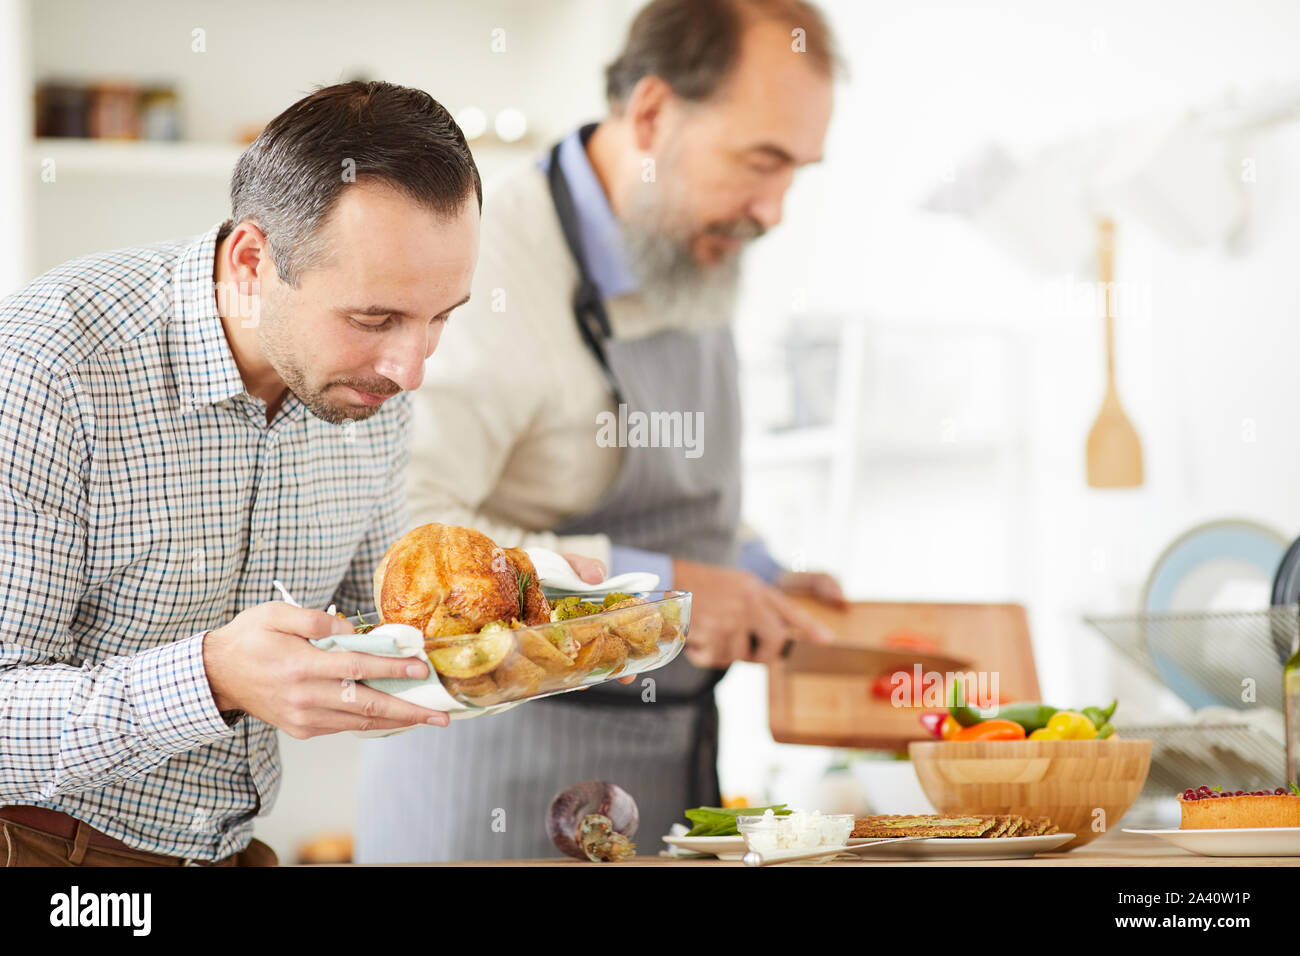 Young man looking at roast turkey in his hands with senior man cutting vegetable in the background at home Stock Photo